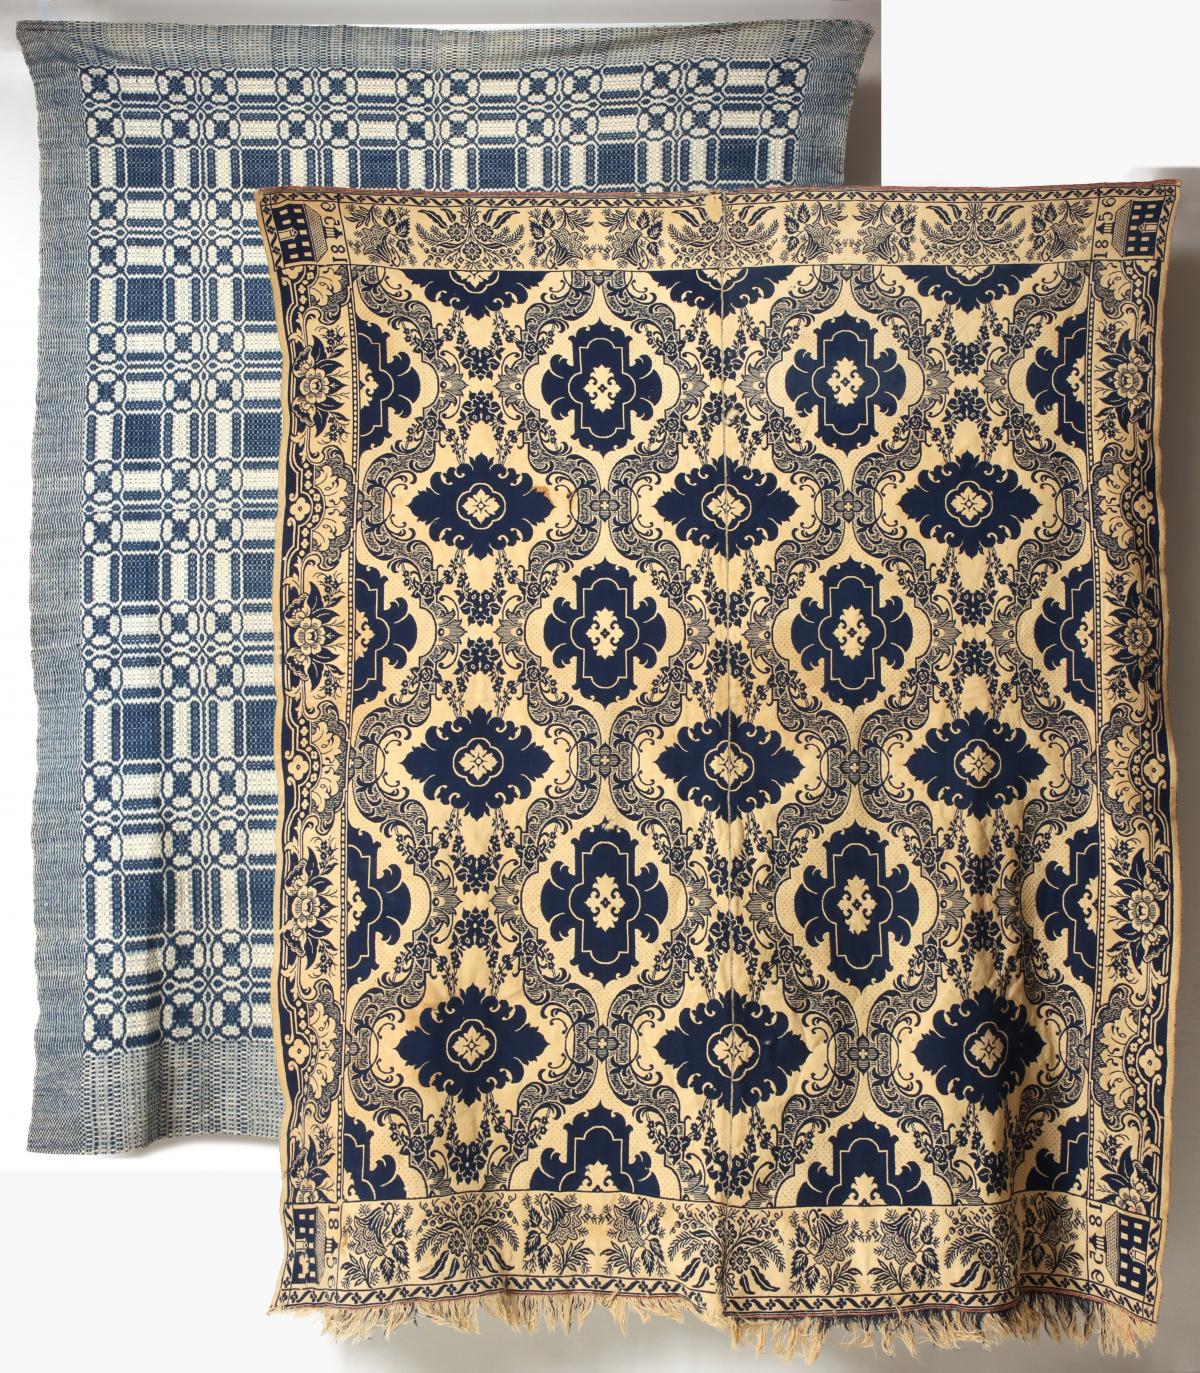 AN 1856 BLUE WHITE JACQUARD COVERLET ATTRIBUTED CRAIG